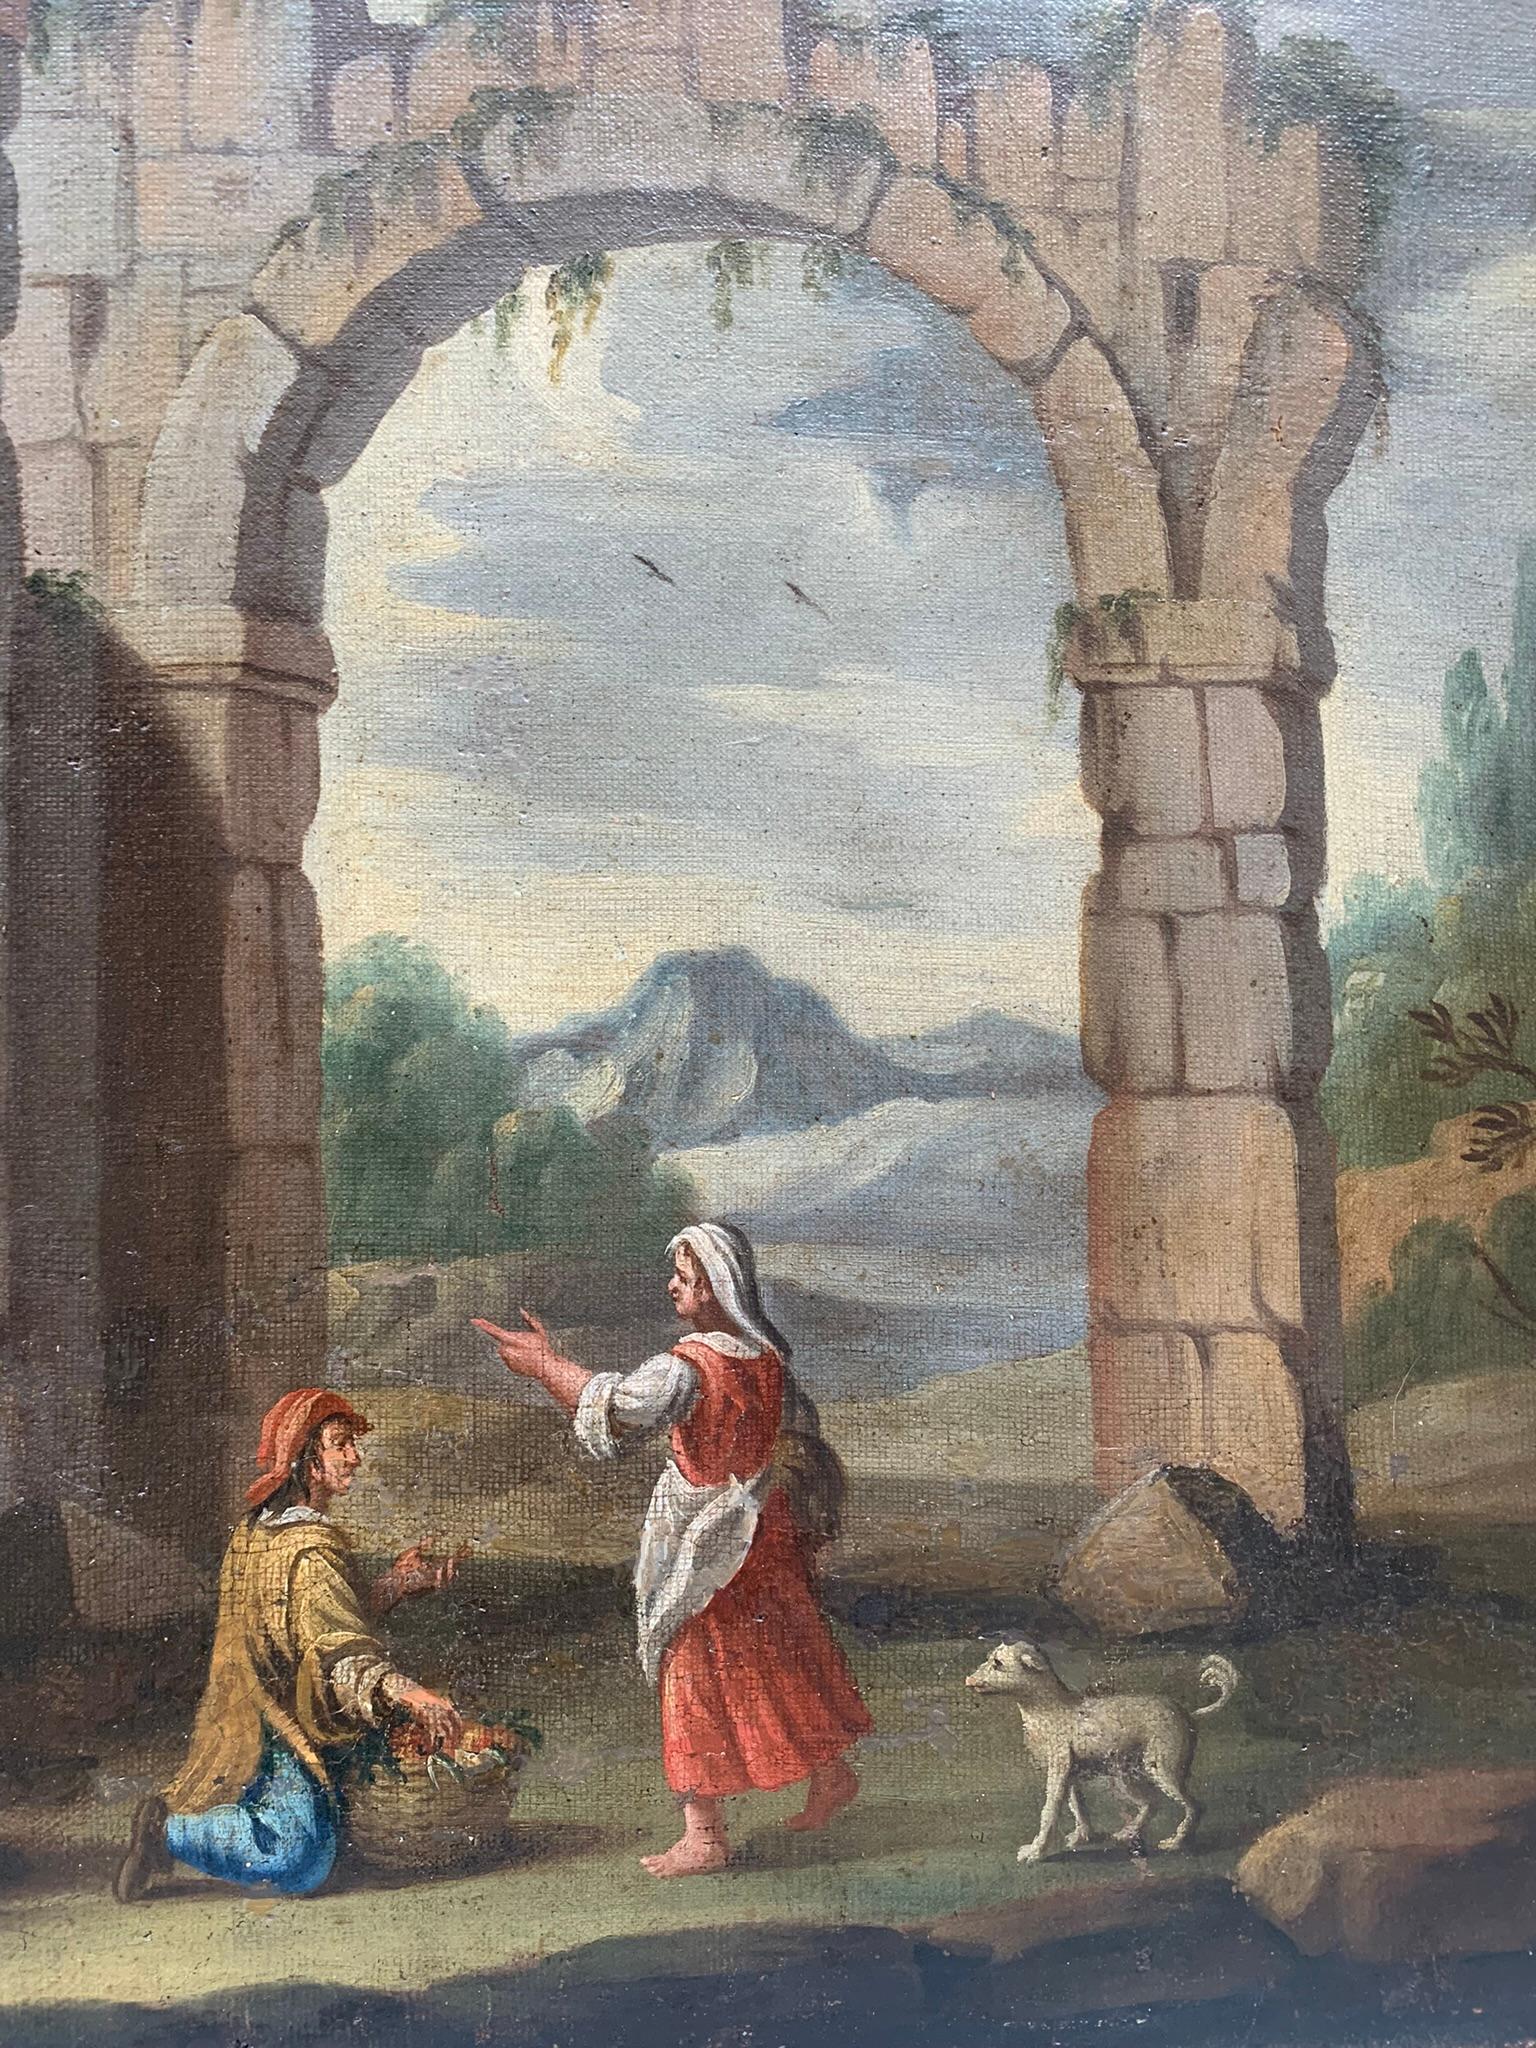 Architectural whimsy with Roman ruins, column and ancient arches. Year 1718.
Oil on Canvas. Original canvas.
Roman school of the early 18th century.

The painting is part of the series of 3 paintings of the same size and subject, which we offer for